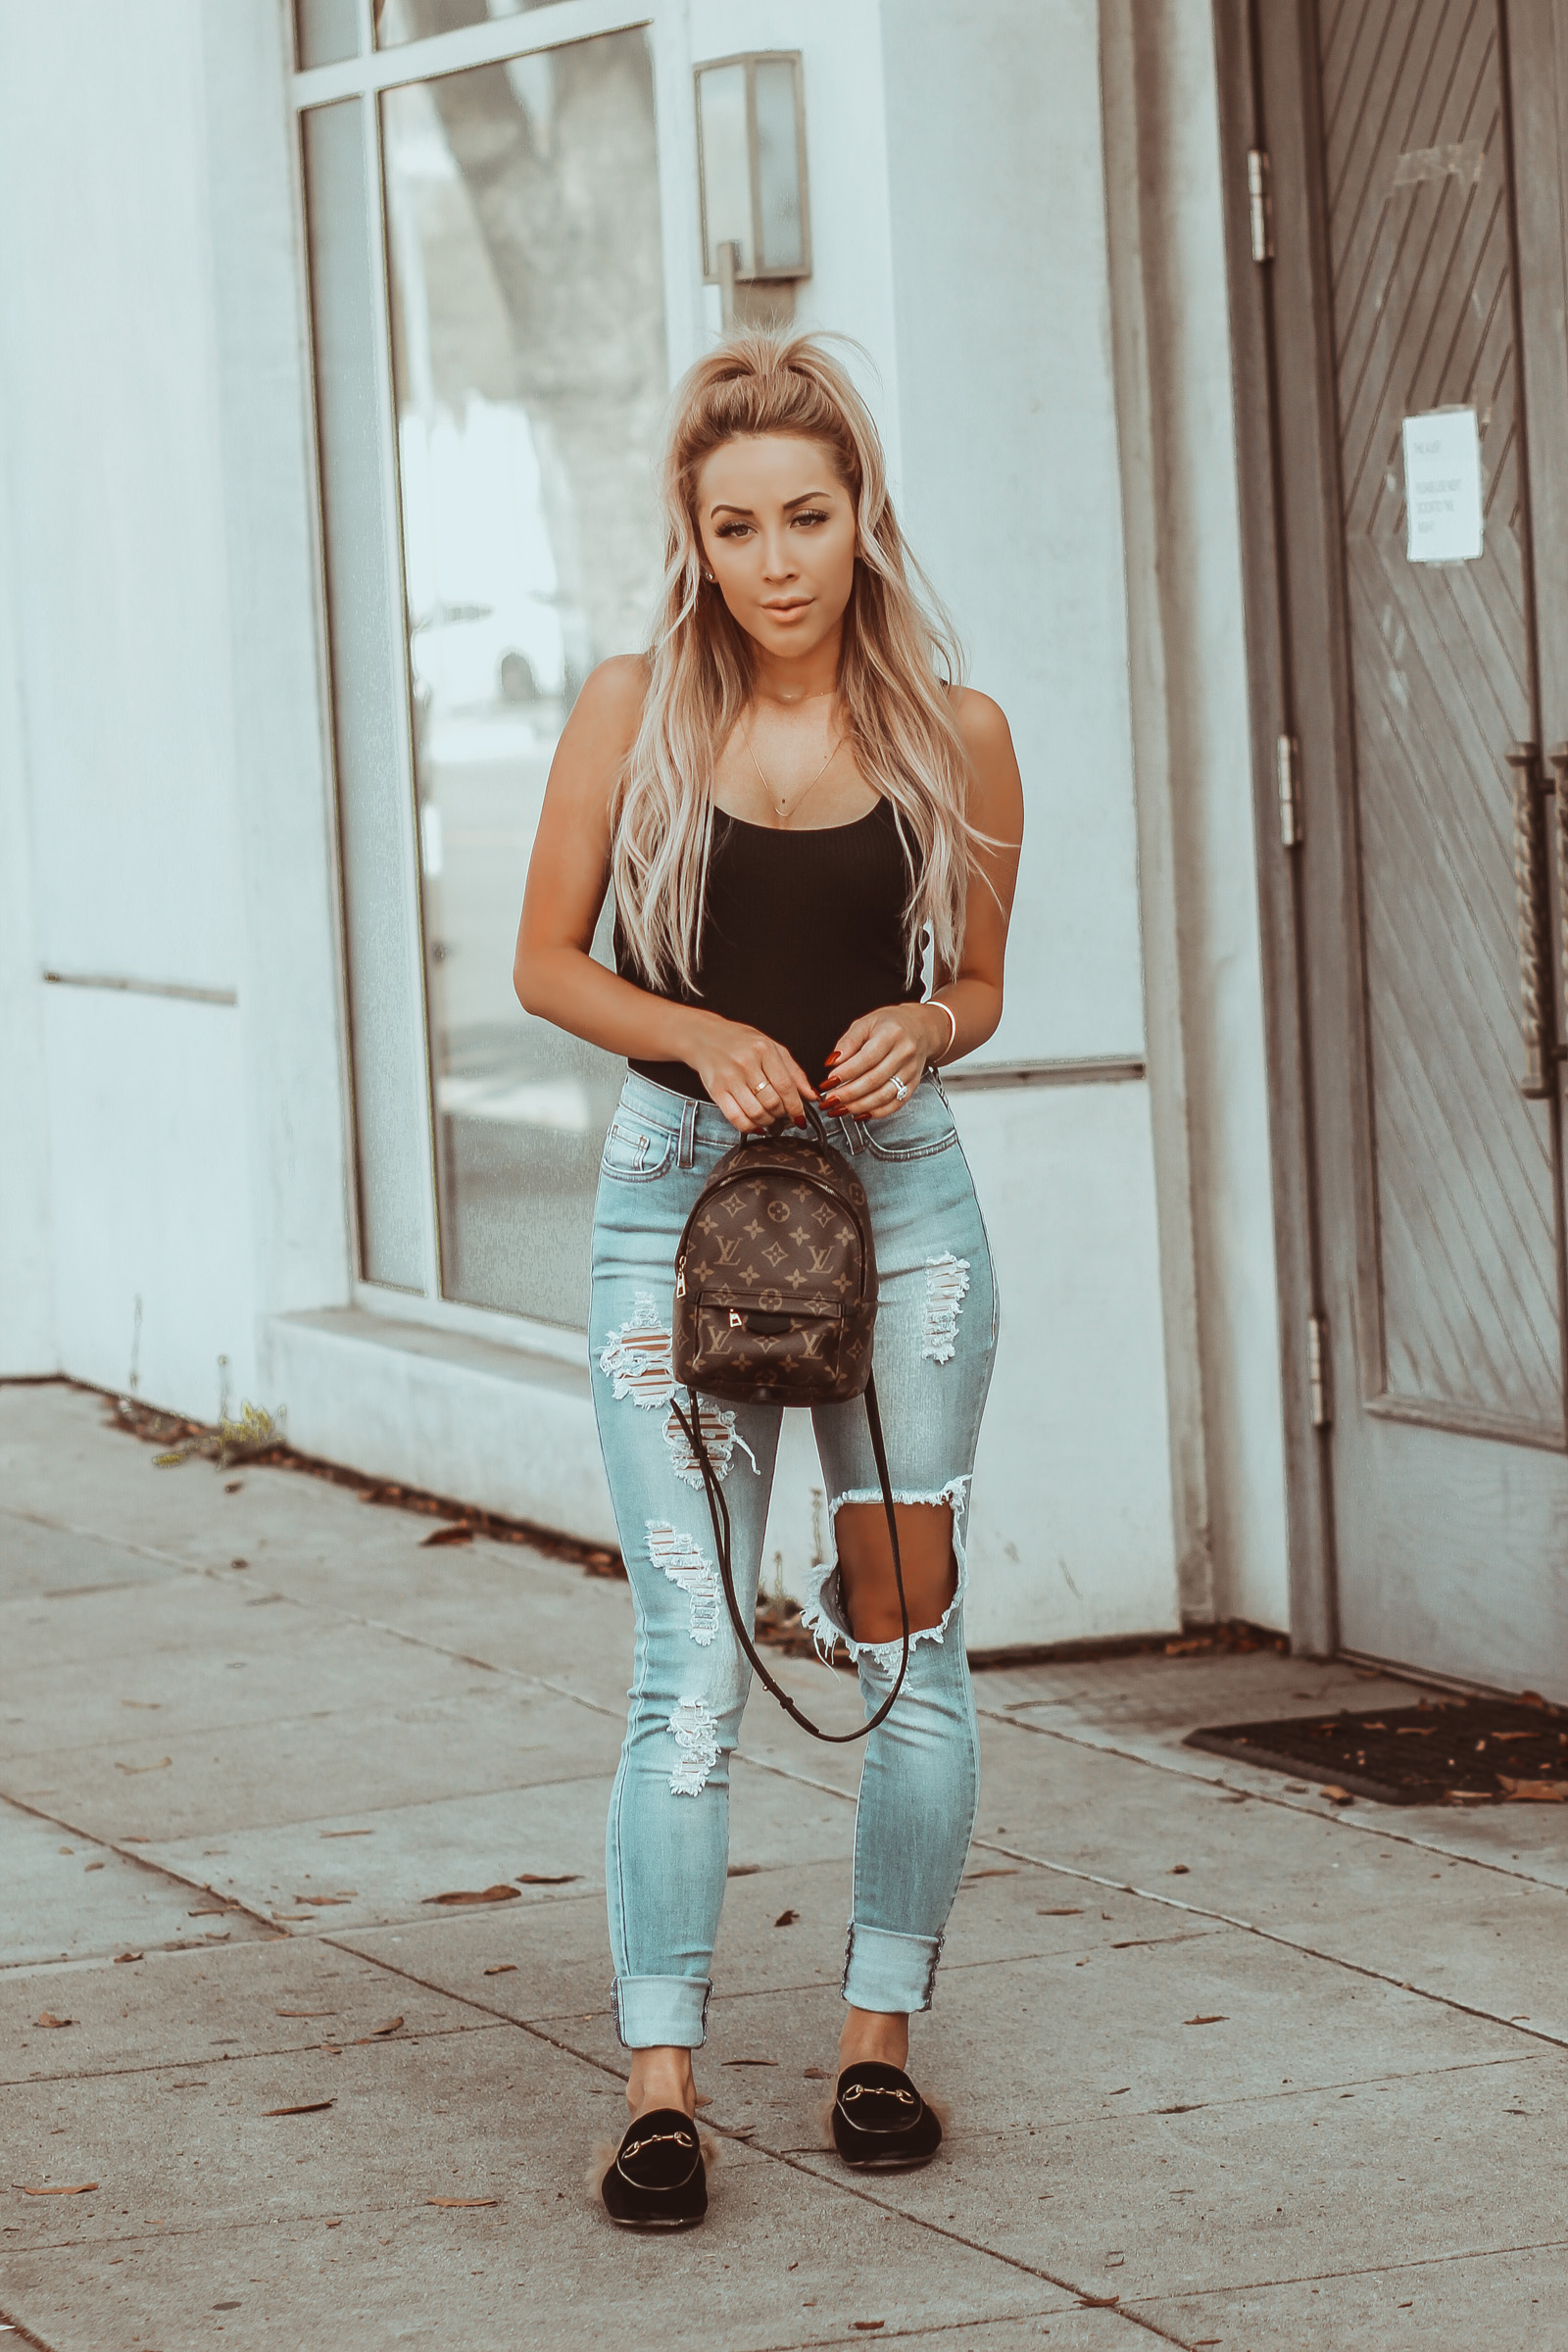 Black Bodysuit Revolve | Distressed Jeans | Louis Vuitton Palm Springs Backpack | Hair Half Up Half Down | Gucci Mules | Blondie in the City by Hayley Larue